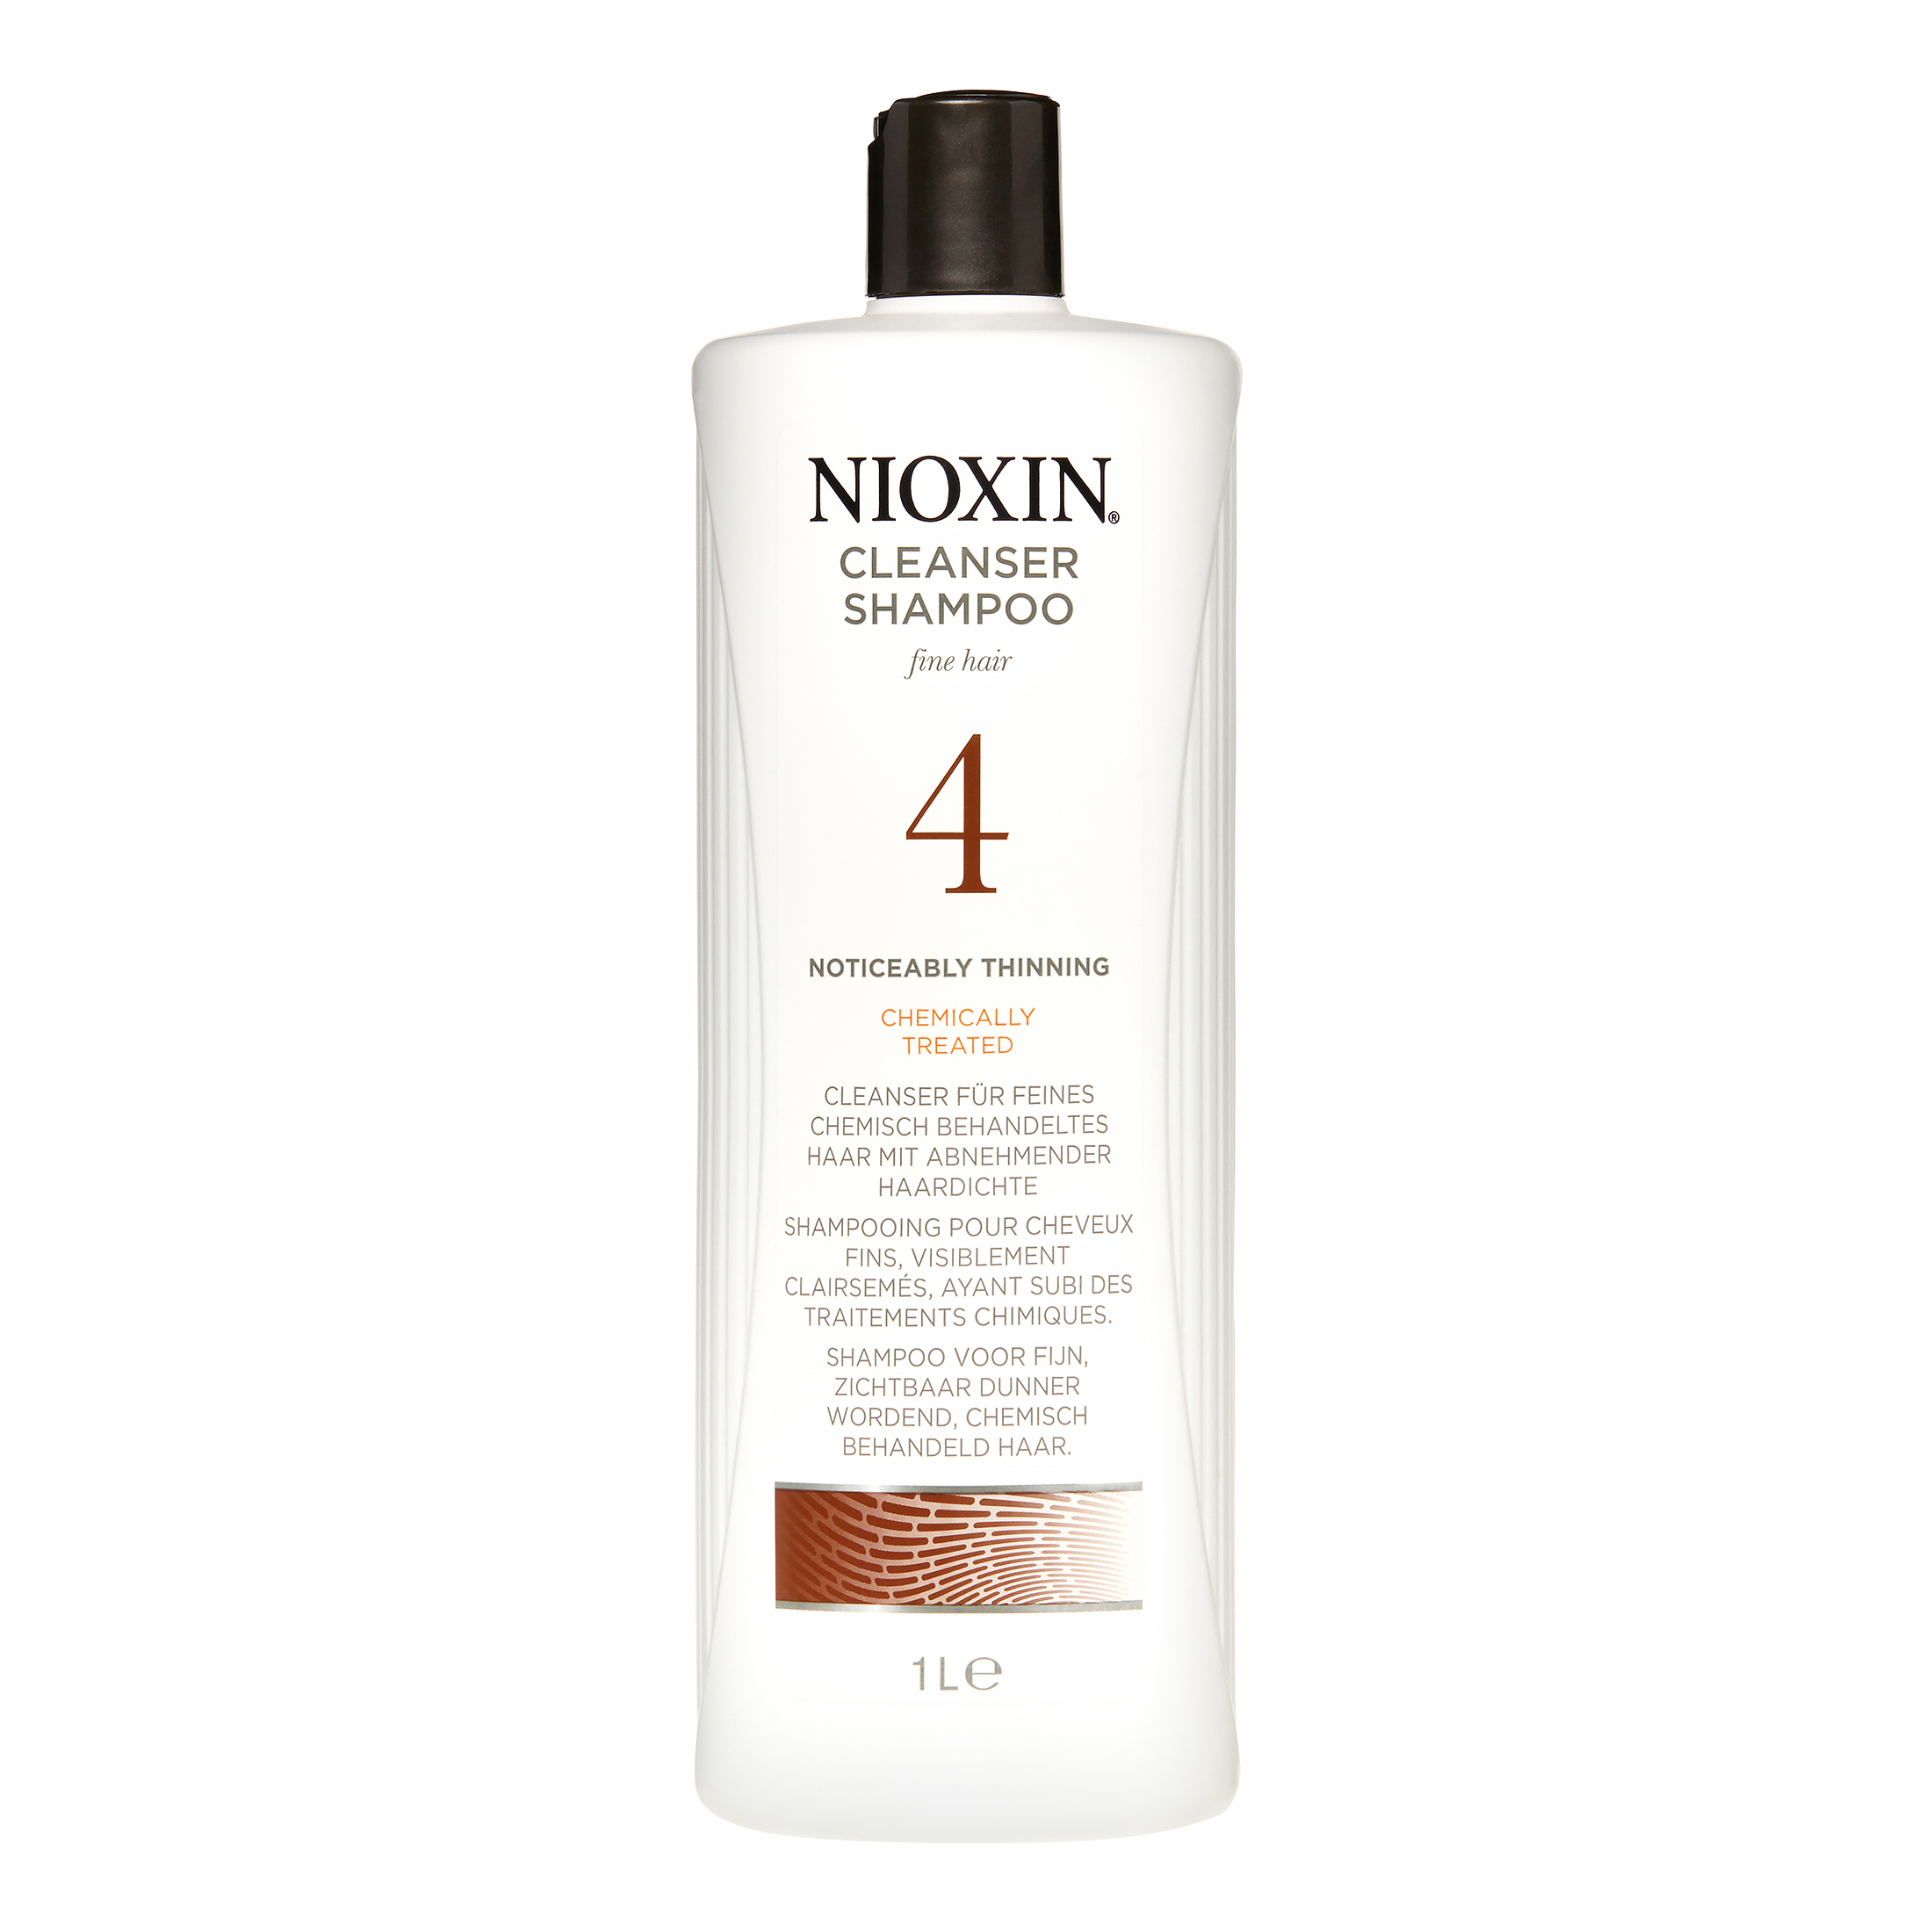 Nioxin System 4 Cleanser Shampoo 1 Liter/33.8Oz, Cyber Monday Deal! - image 1 of 4